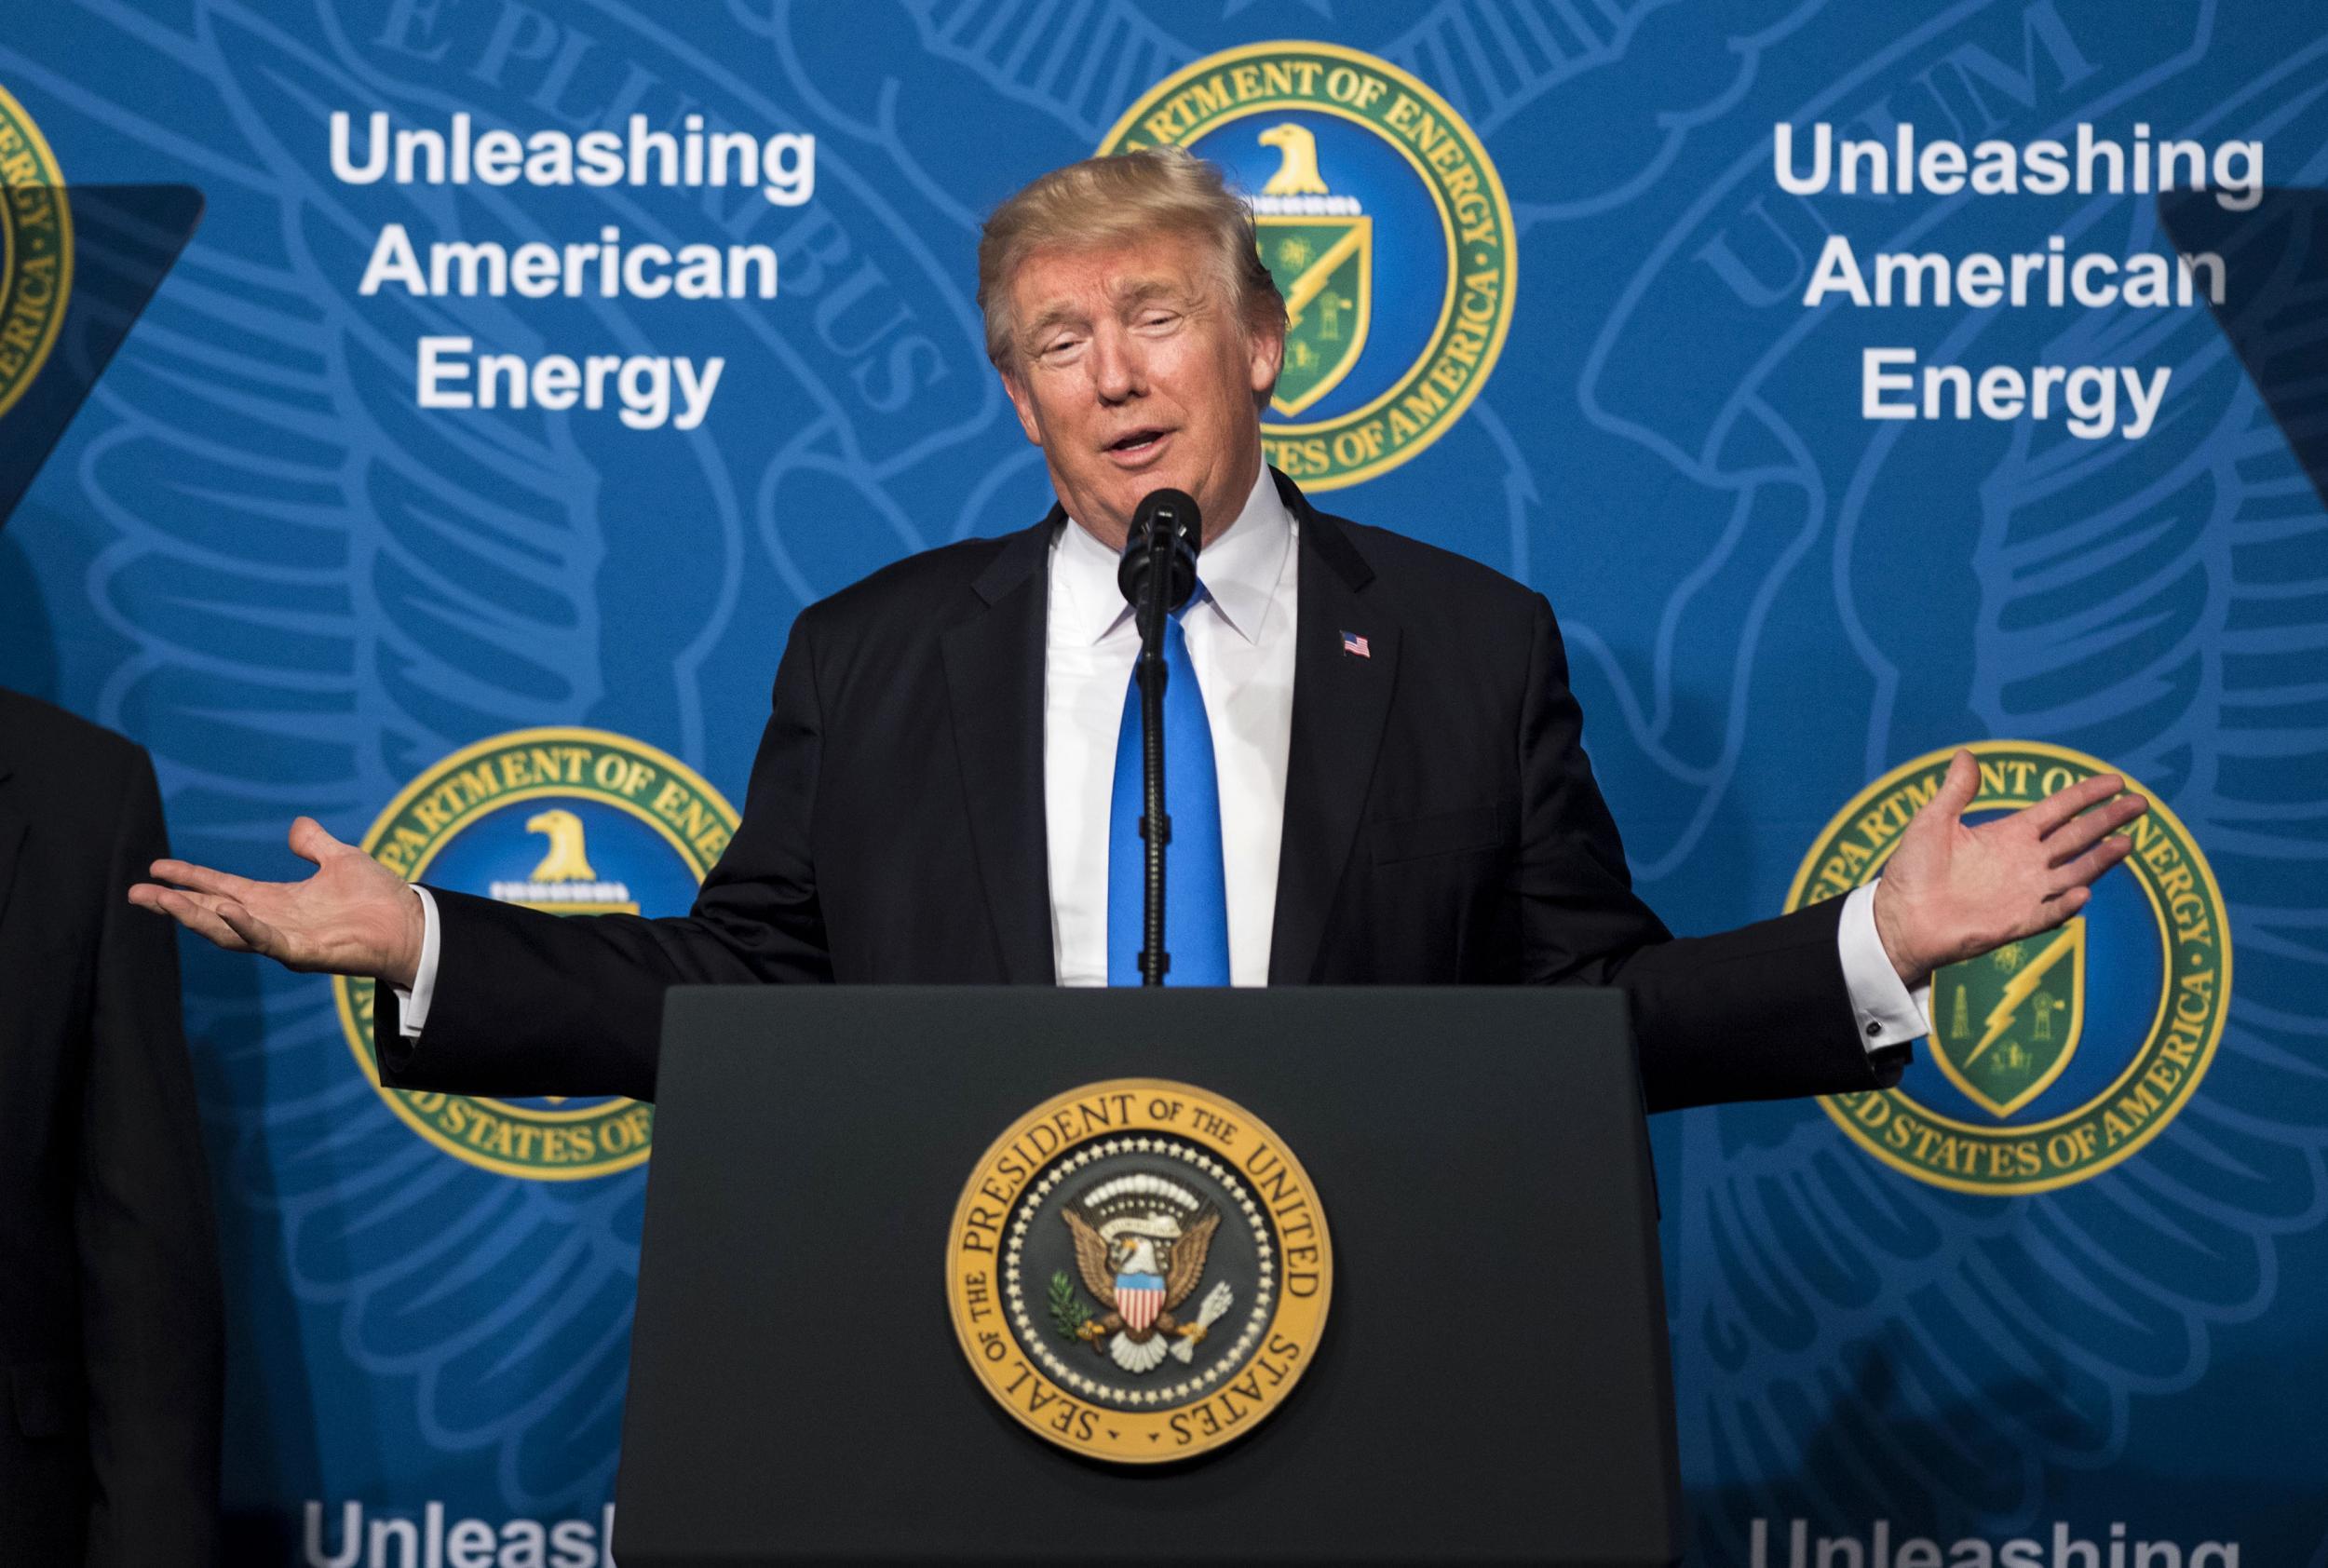 President Donald Trump delivers remarks at the Unleashing American Energy event at the Department of Energy